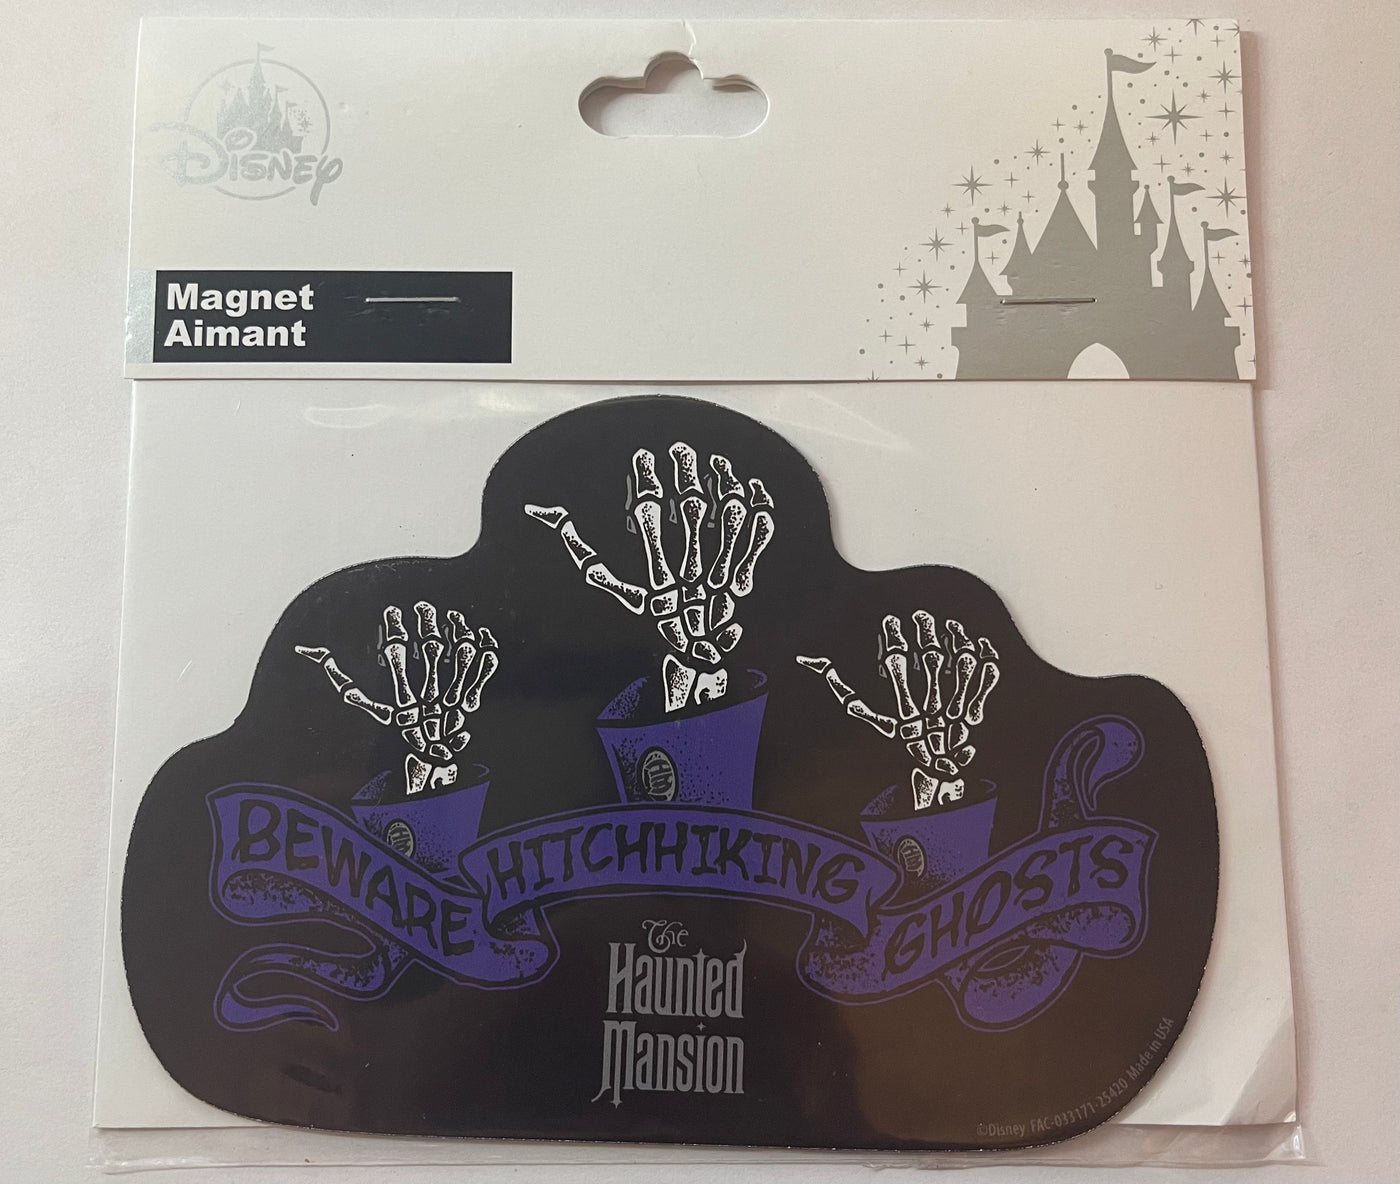 Disney Parks Beware Hitchhiking Ghosts Haunted Mansion Ride Magnet